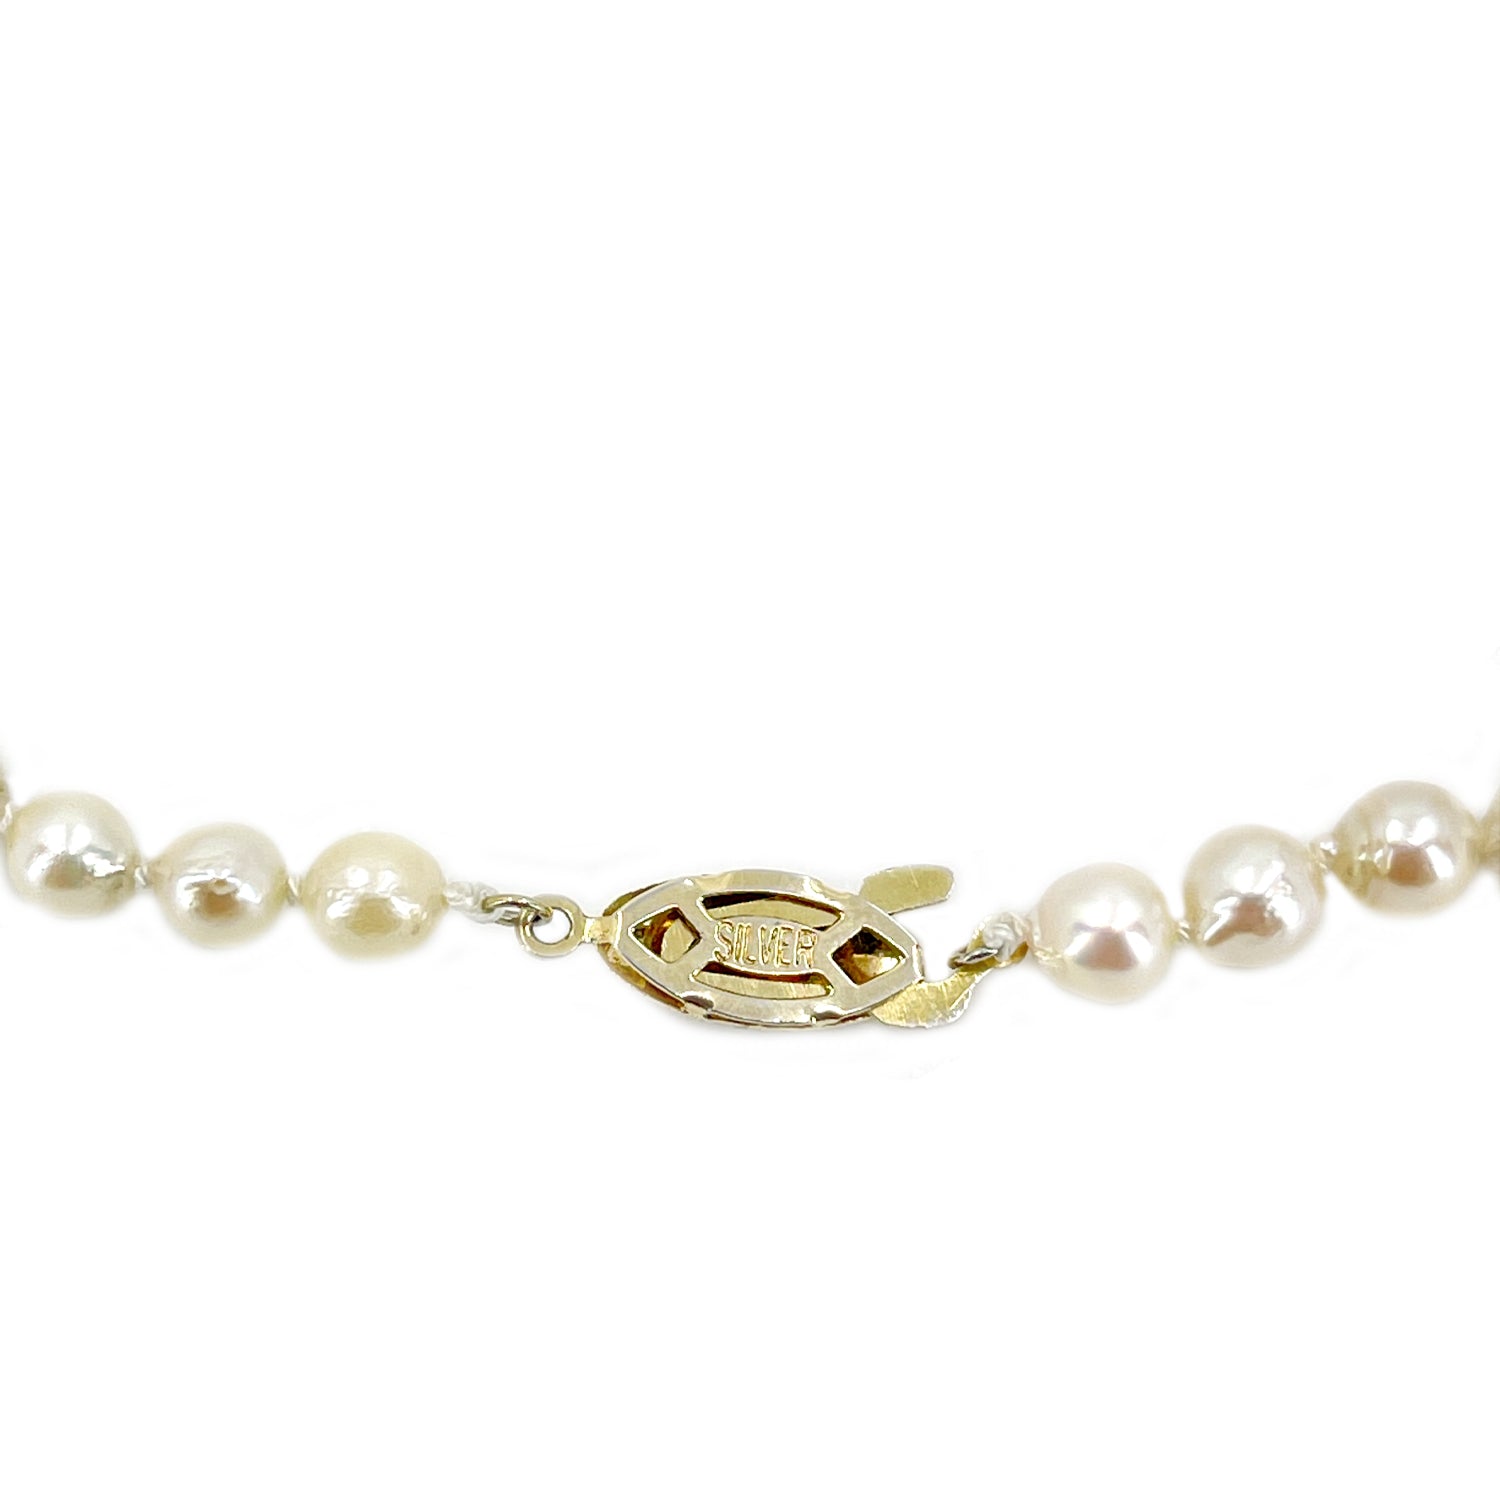 Choker Baroque Vintage Japanese Saltwater Cultured Akoya Pearl Necklace - Sterling Silver Gold Wash 15.50 Inch